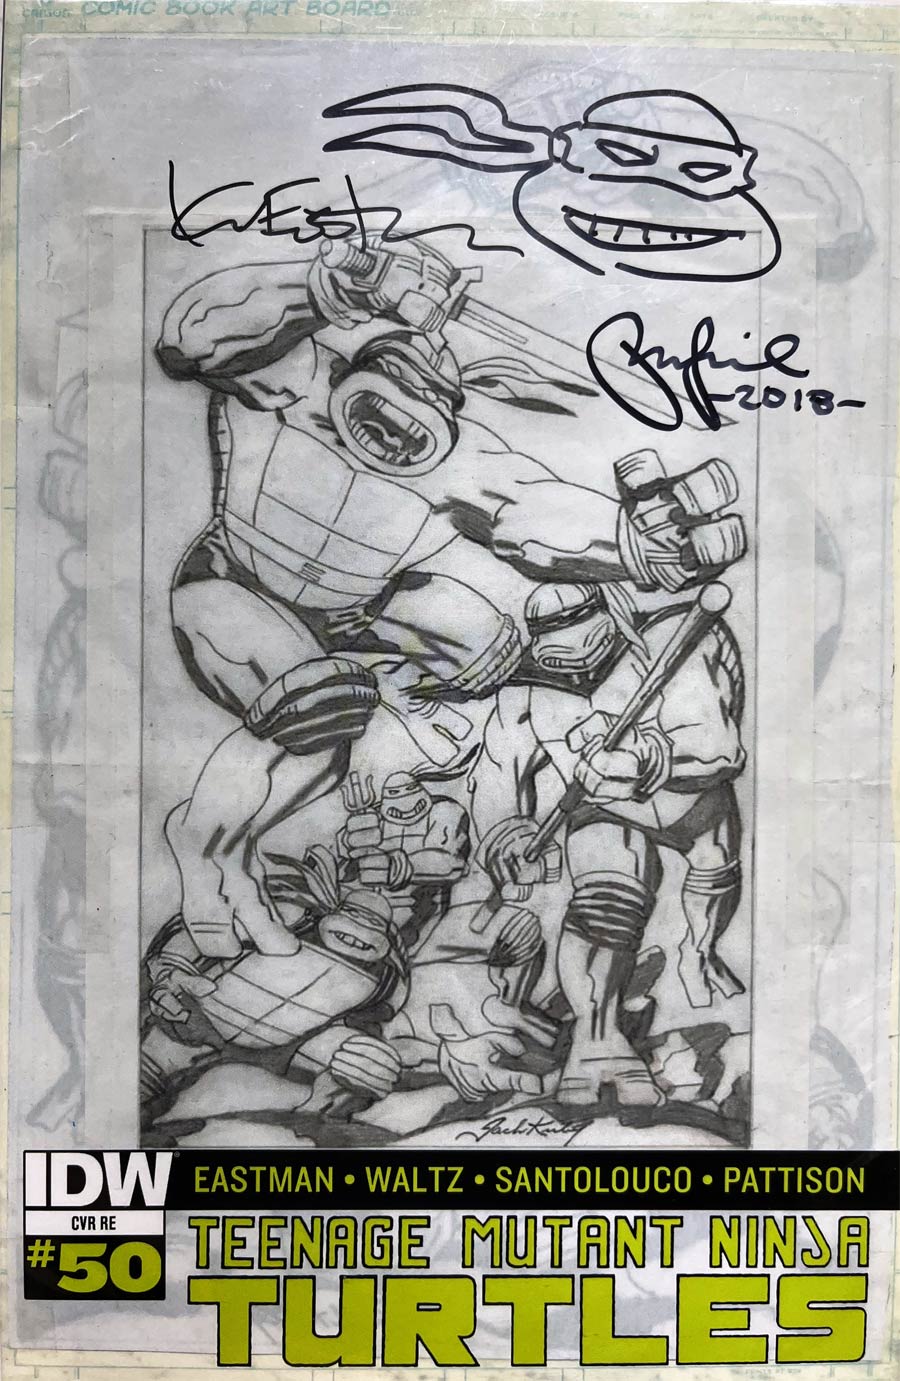 Teenage Mutant Ninja Turtles Vol 5 #50 Cover F Jack Kirby Black And White Variant Signed by Peter Laird and Kevin Eastman